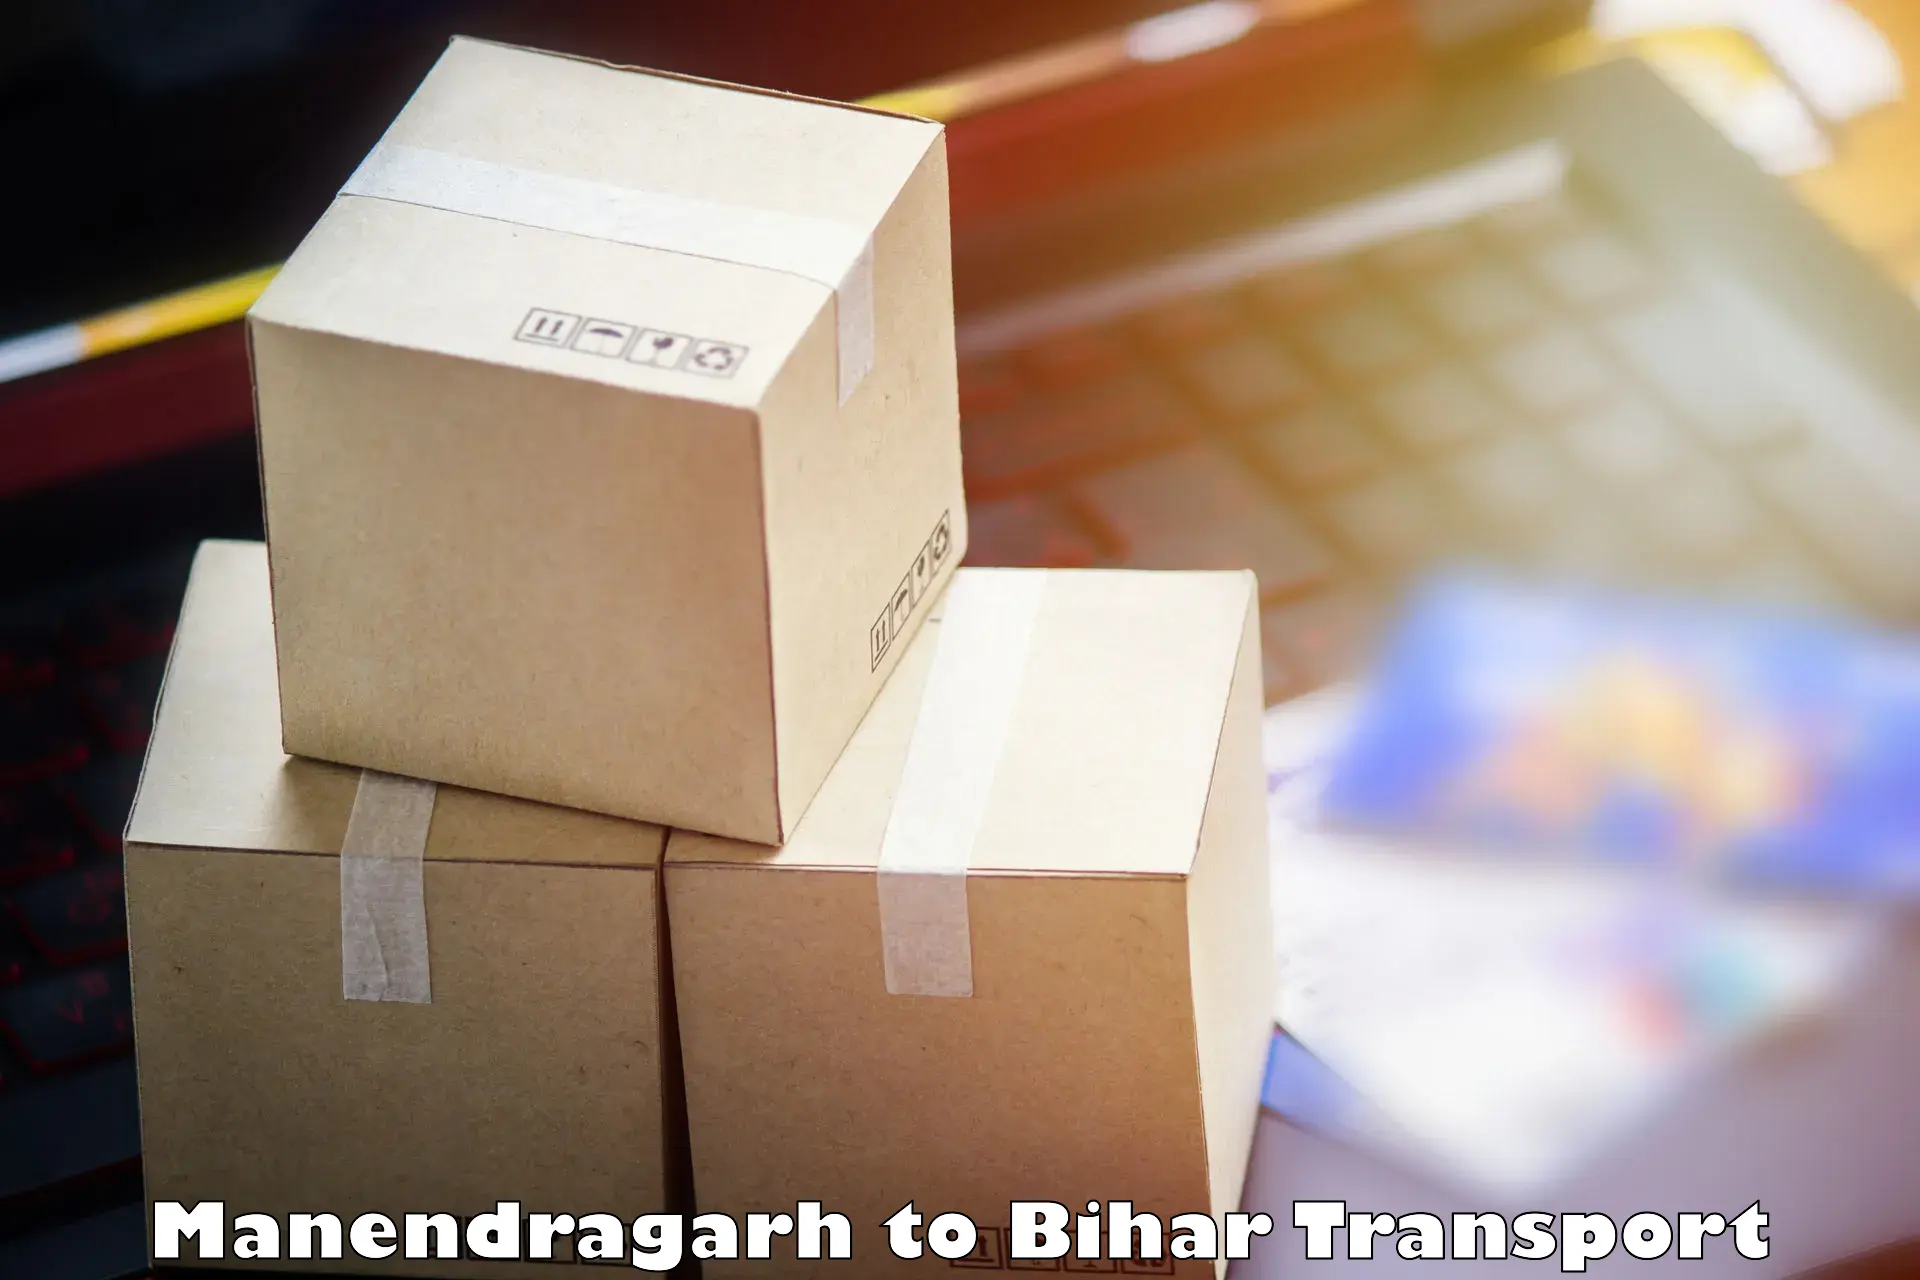 Air freight transport services in Manendragarh to Bhojpur